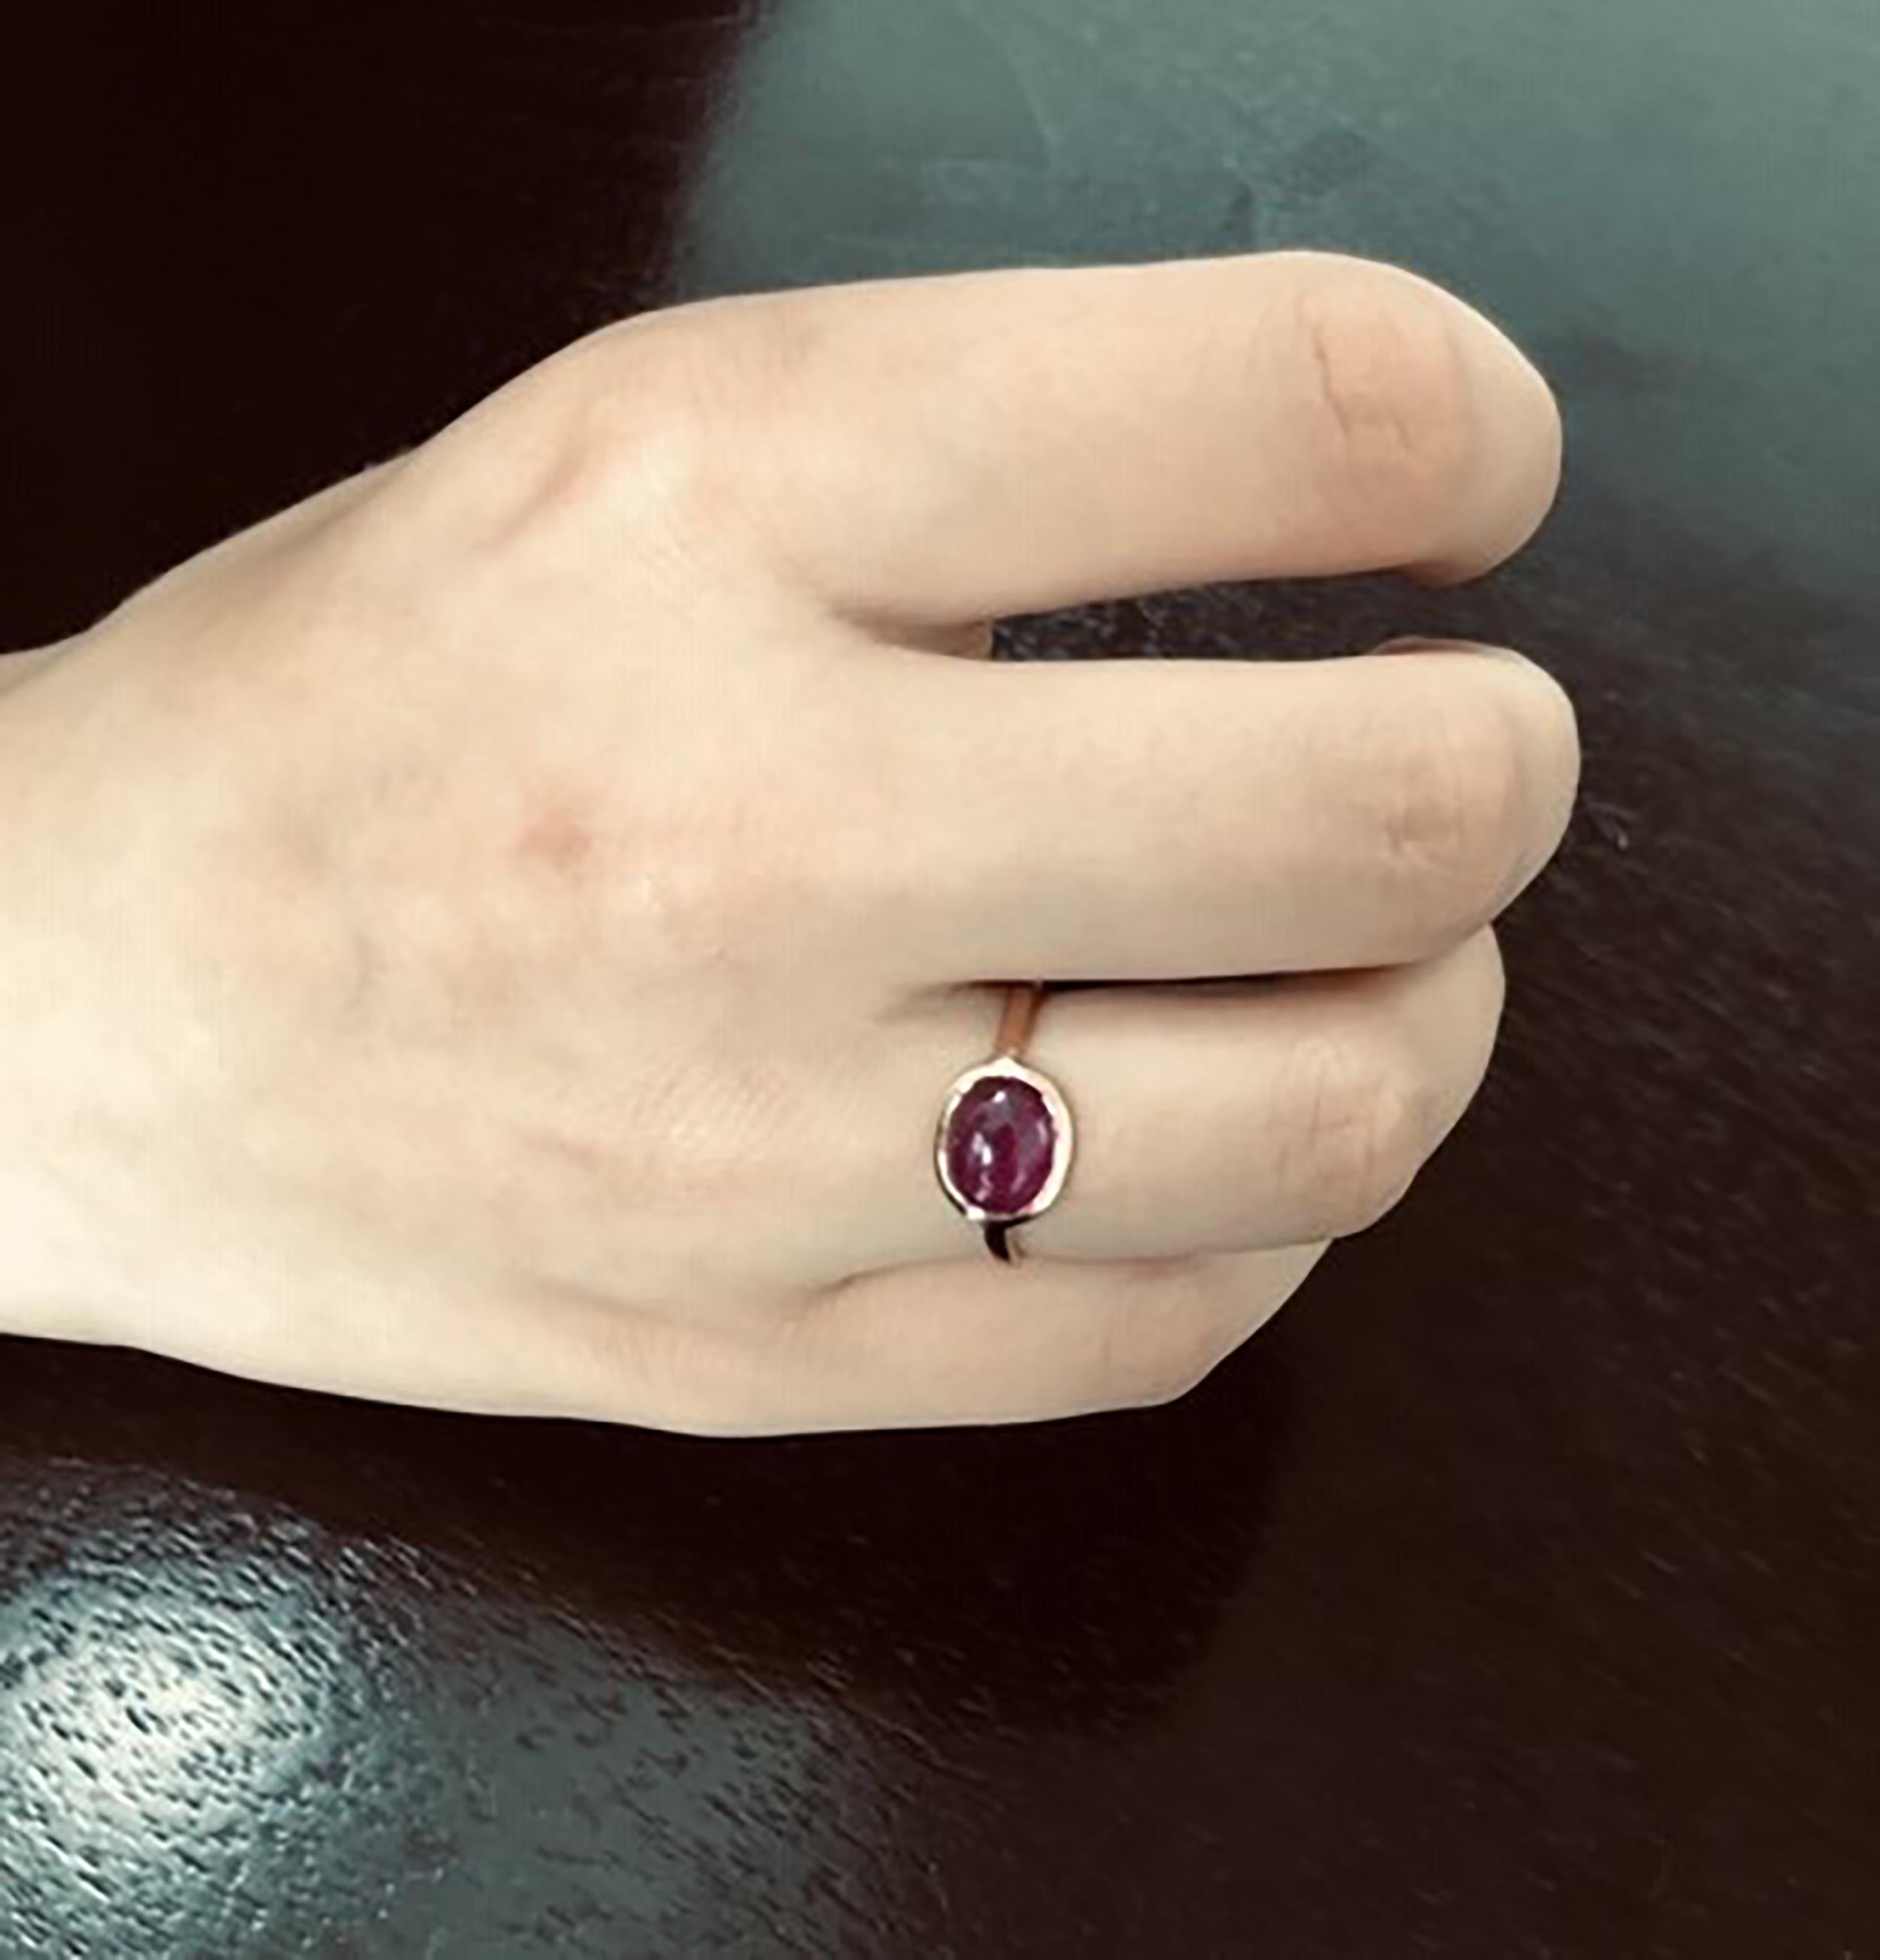 Eighteen karat rose gold ring
Cabochon Burma ruby weighing 3 carat                                                                       
Ring size 6 In Stock
Ring can be resized 
New Ring
Handmade in USA
Our design team select gemstones for their